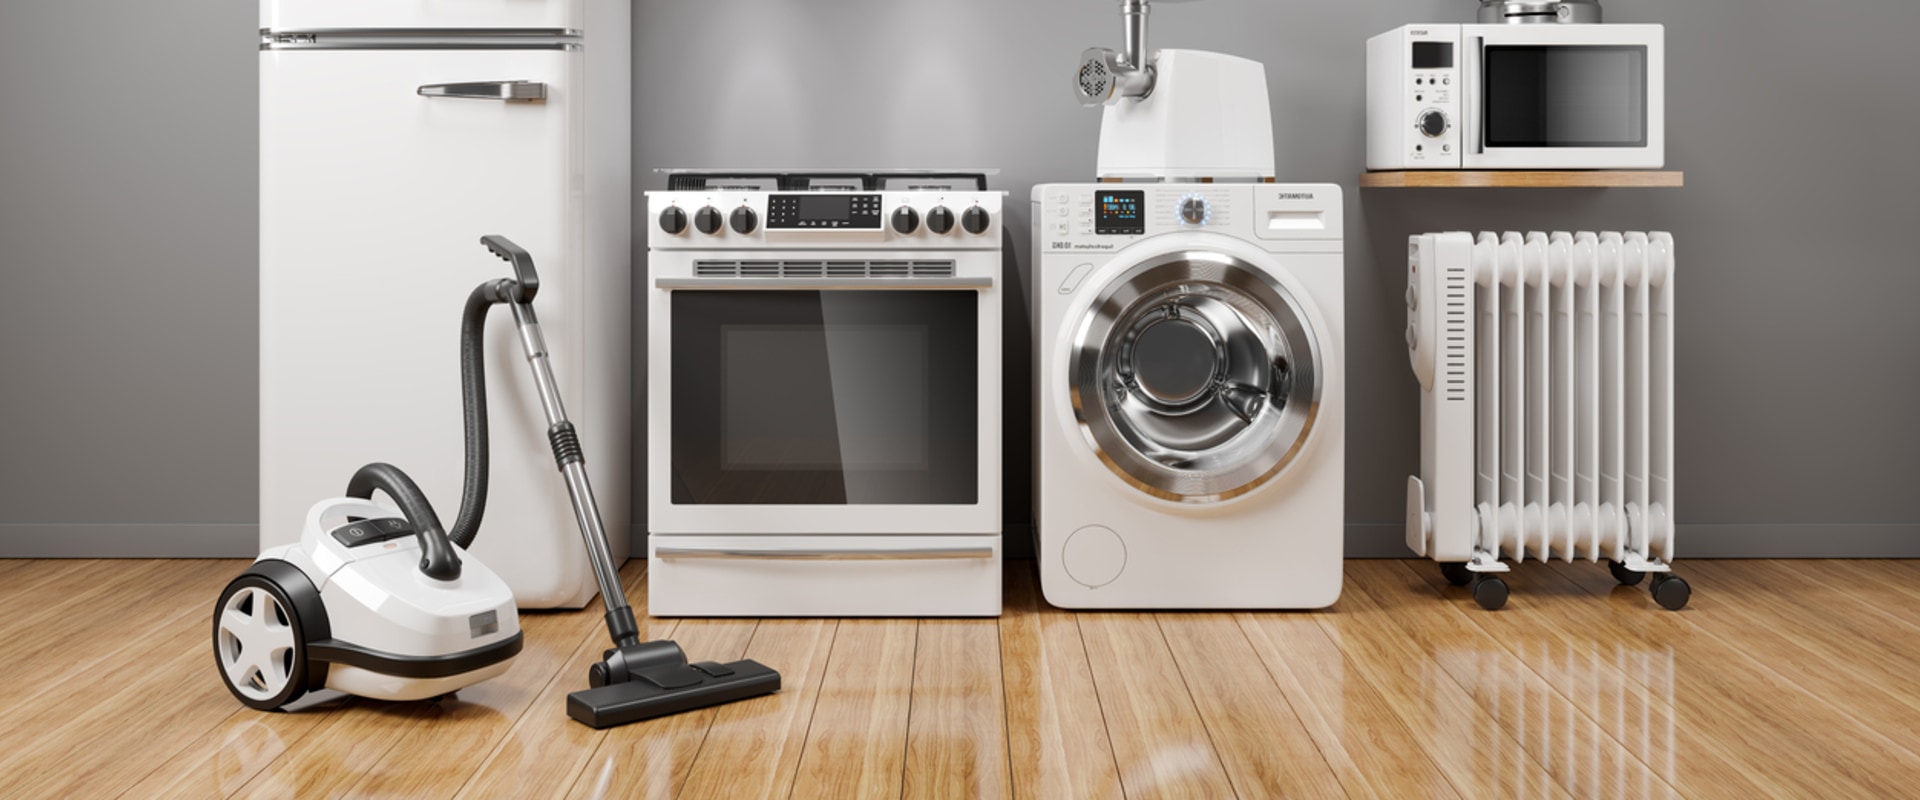 When would you recommend replacing appliances rather than having them repaired?